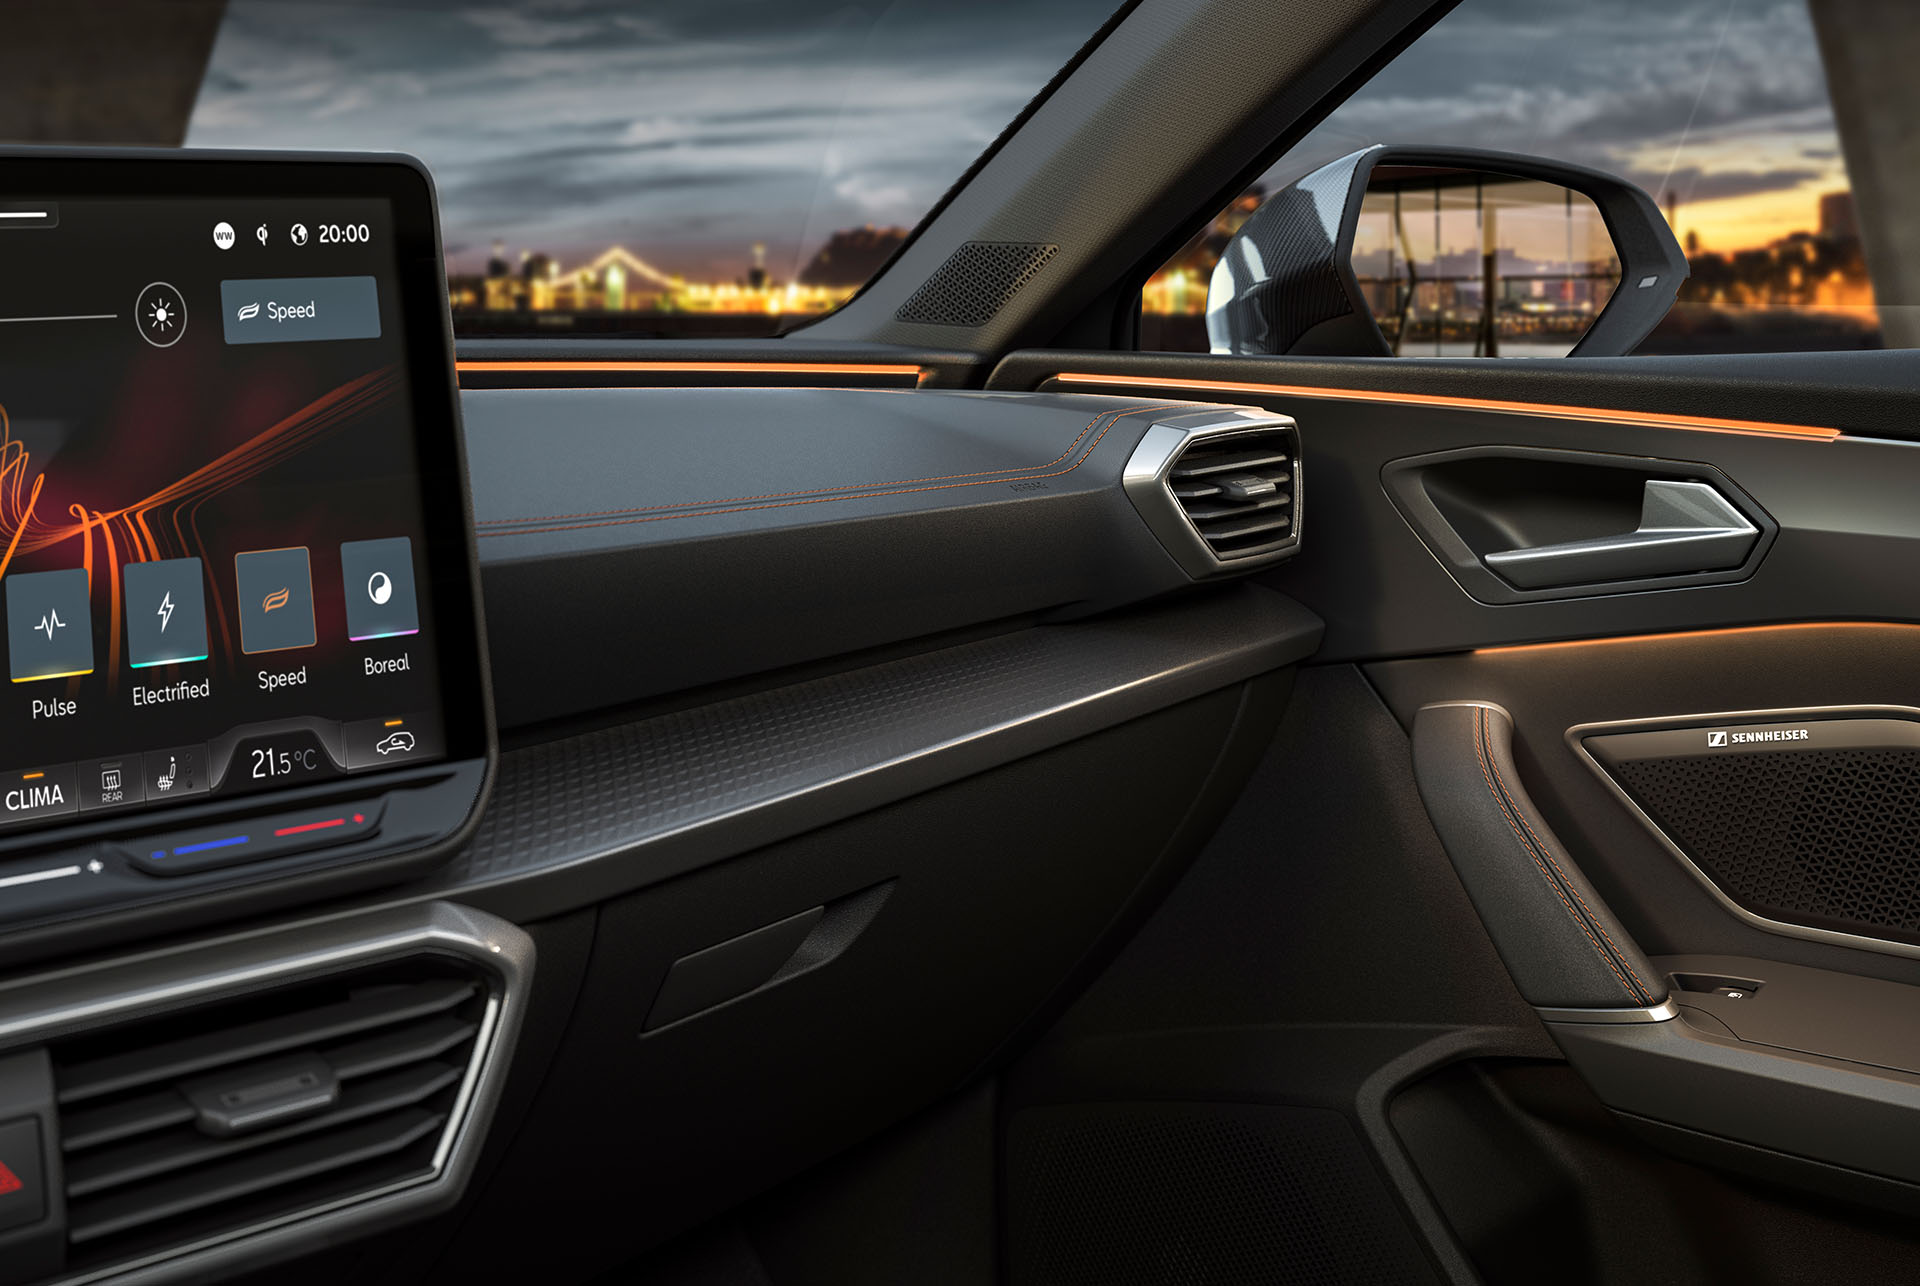 new leon sportstourer 2024 edge equipment upgrade technology, ambient lighting and infotainment system. Keyless advanced, anti-theft system and a rear view camera.